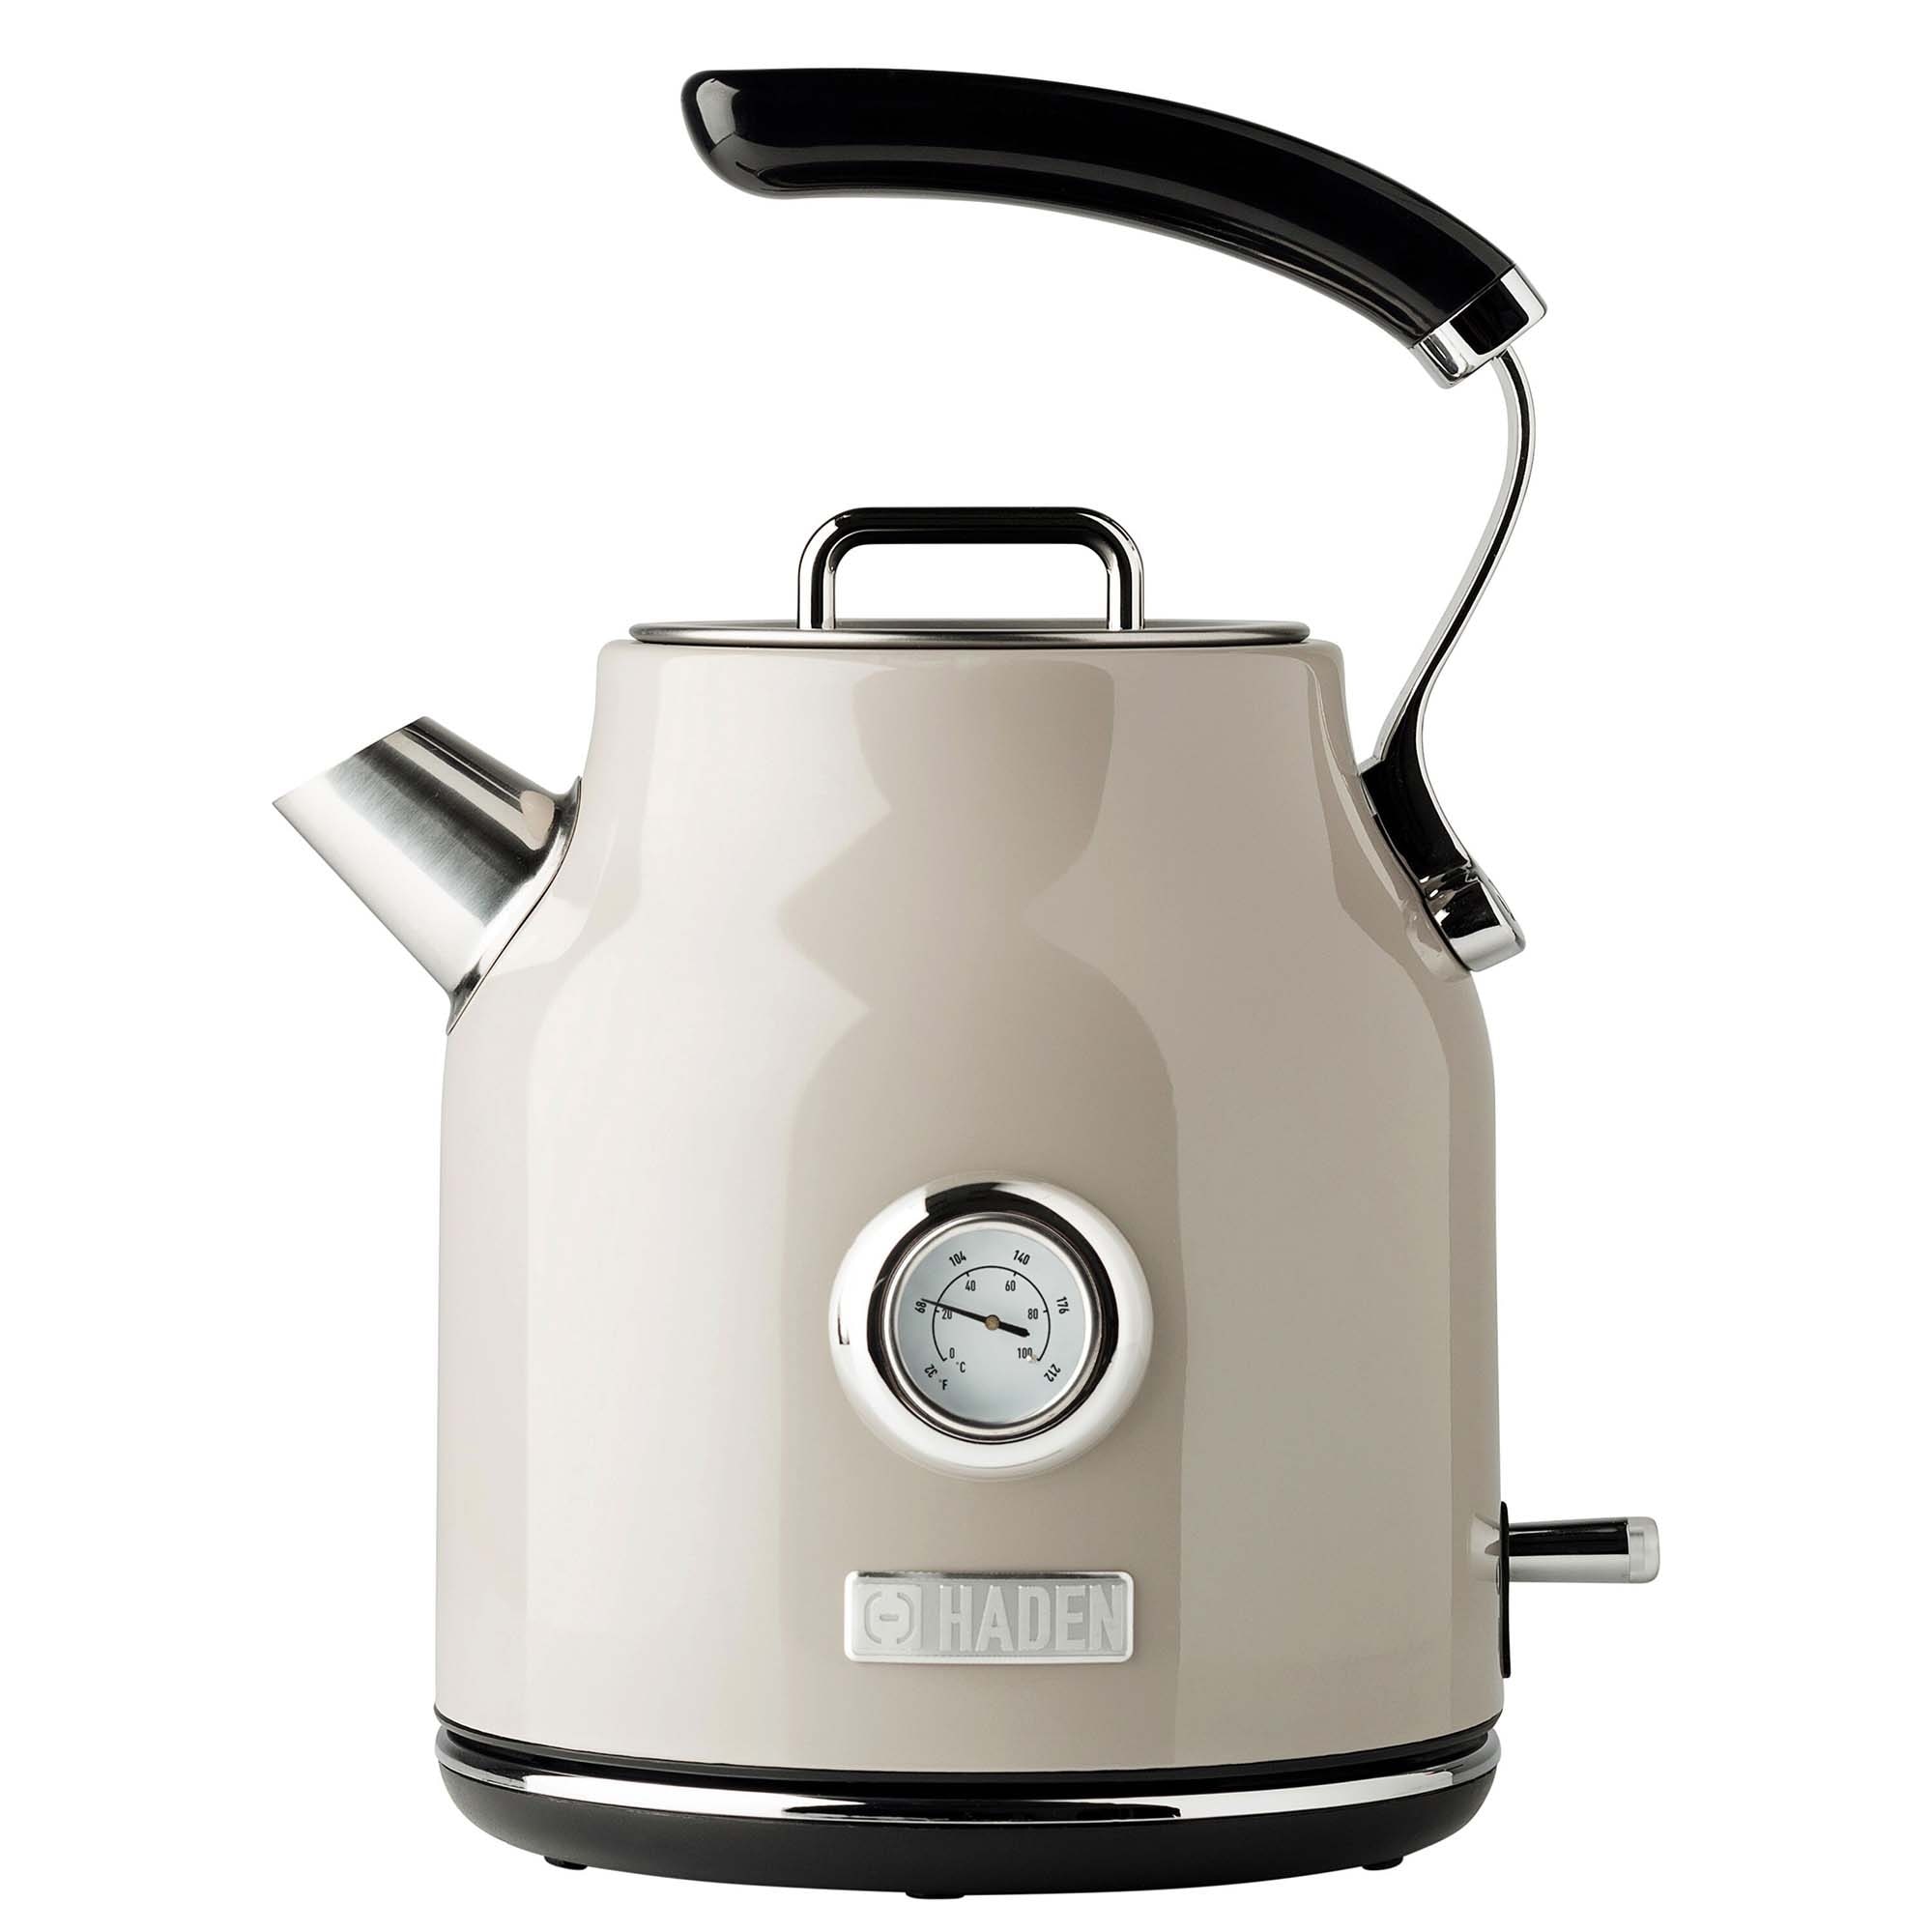 Haden Heritage 1.7 L Stainless Steel Electric Kettle with 2 Slice Toaster, White